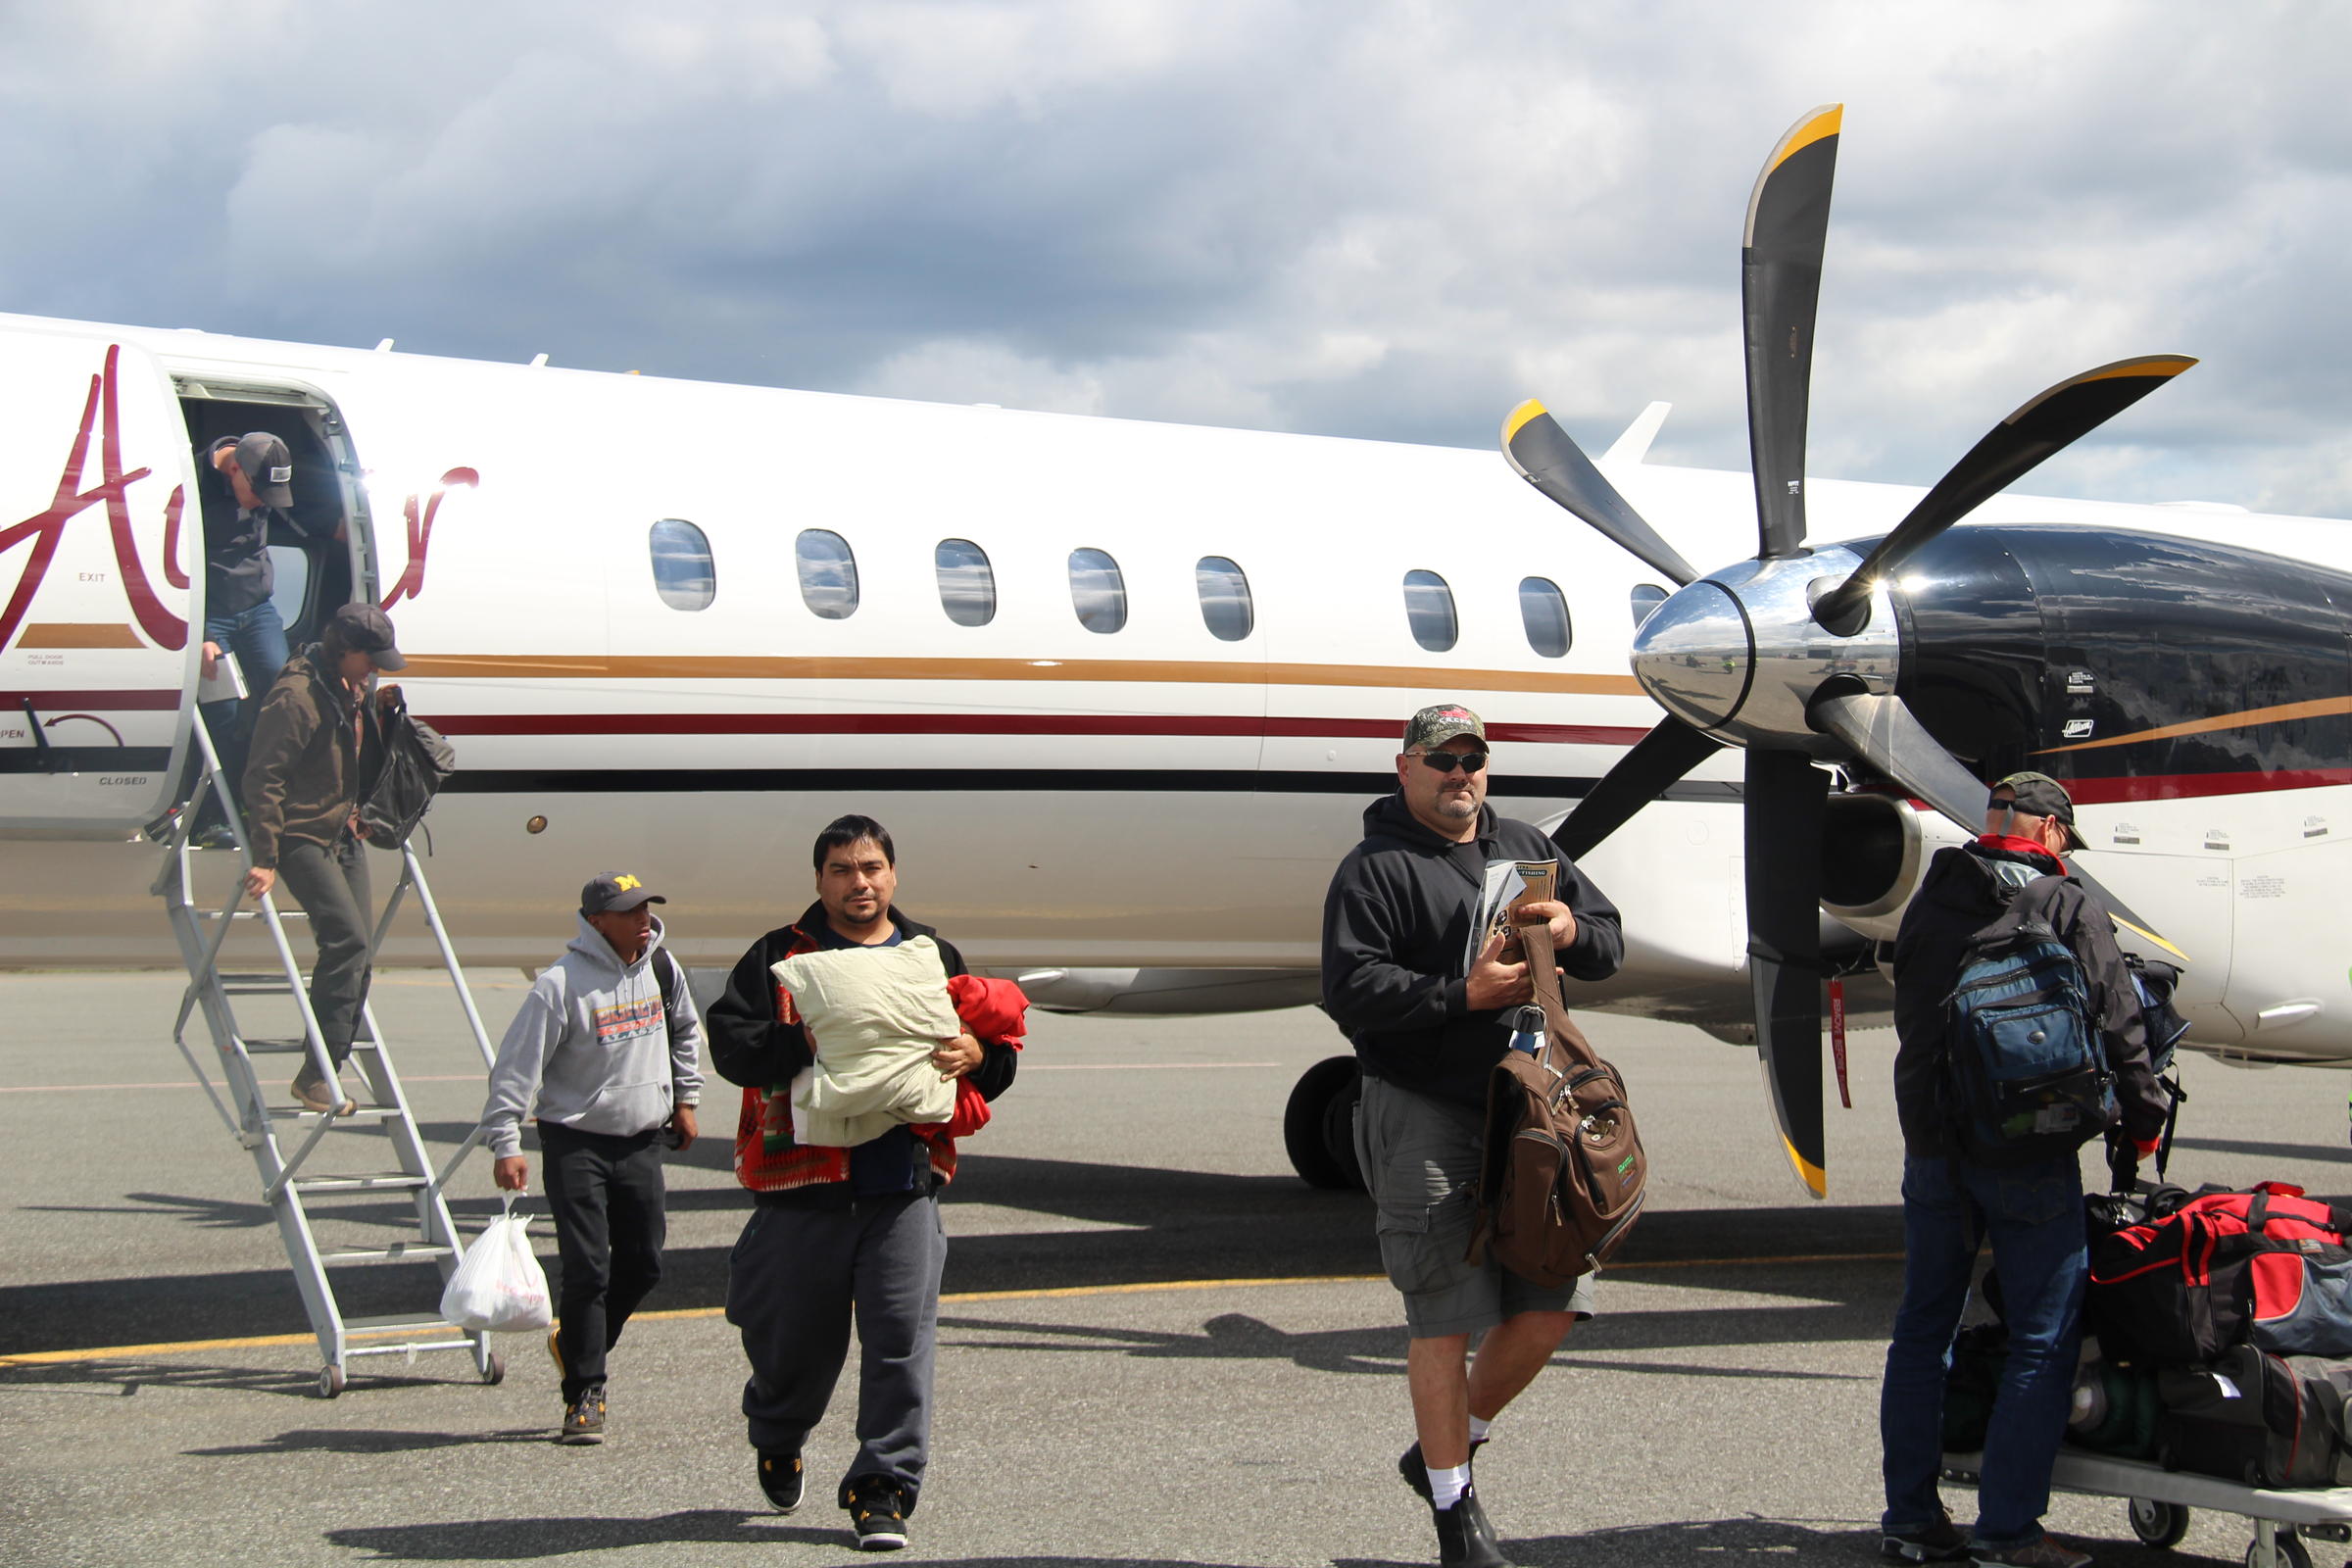 PenAir customers coming into Bristol Bay for the summer, deplaning one of the new Saab 2000s in King Salmon in June. (Photo by KDLG)